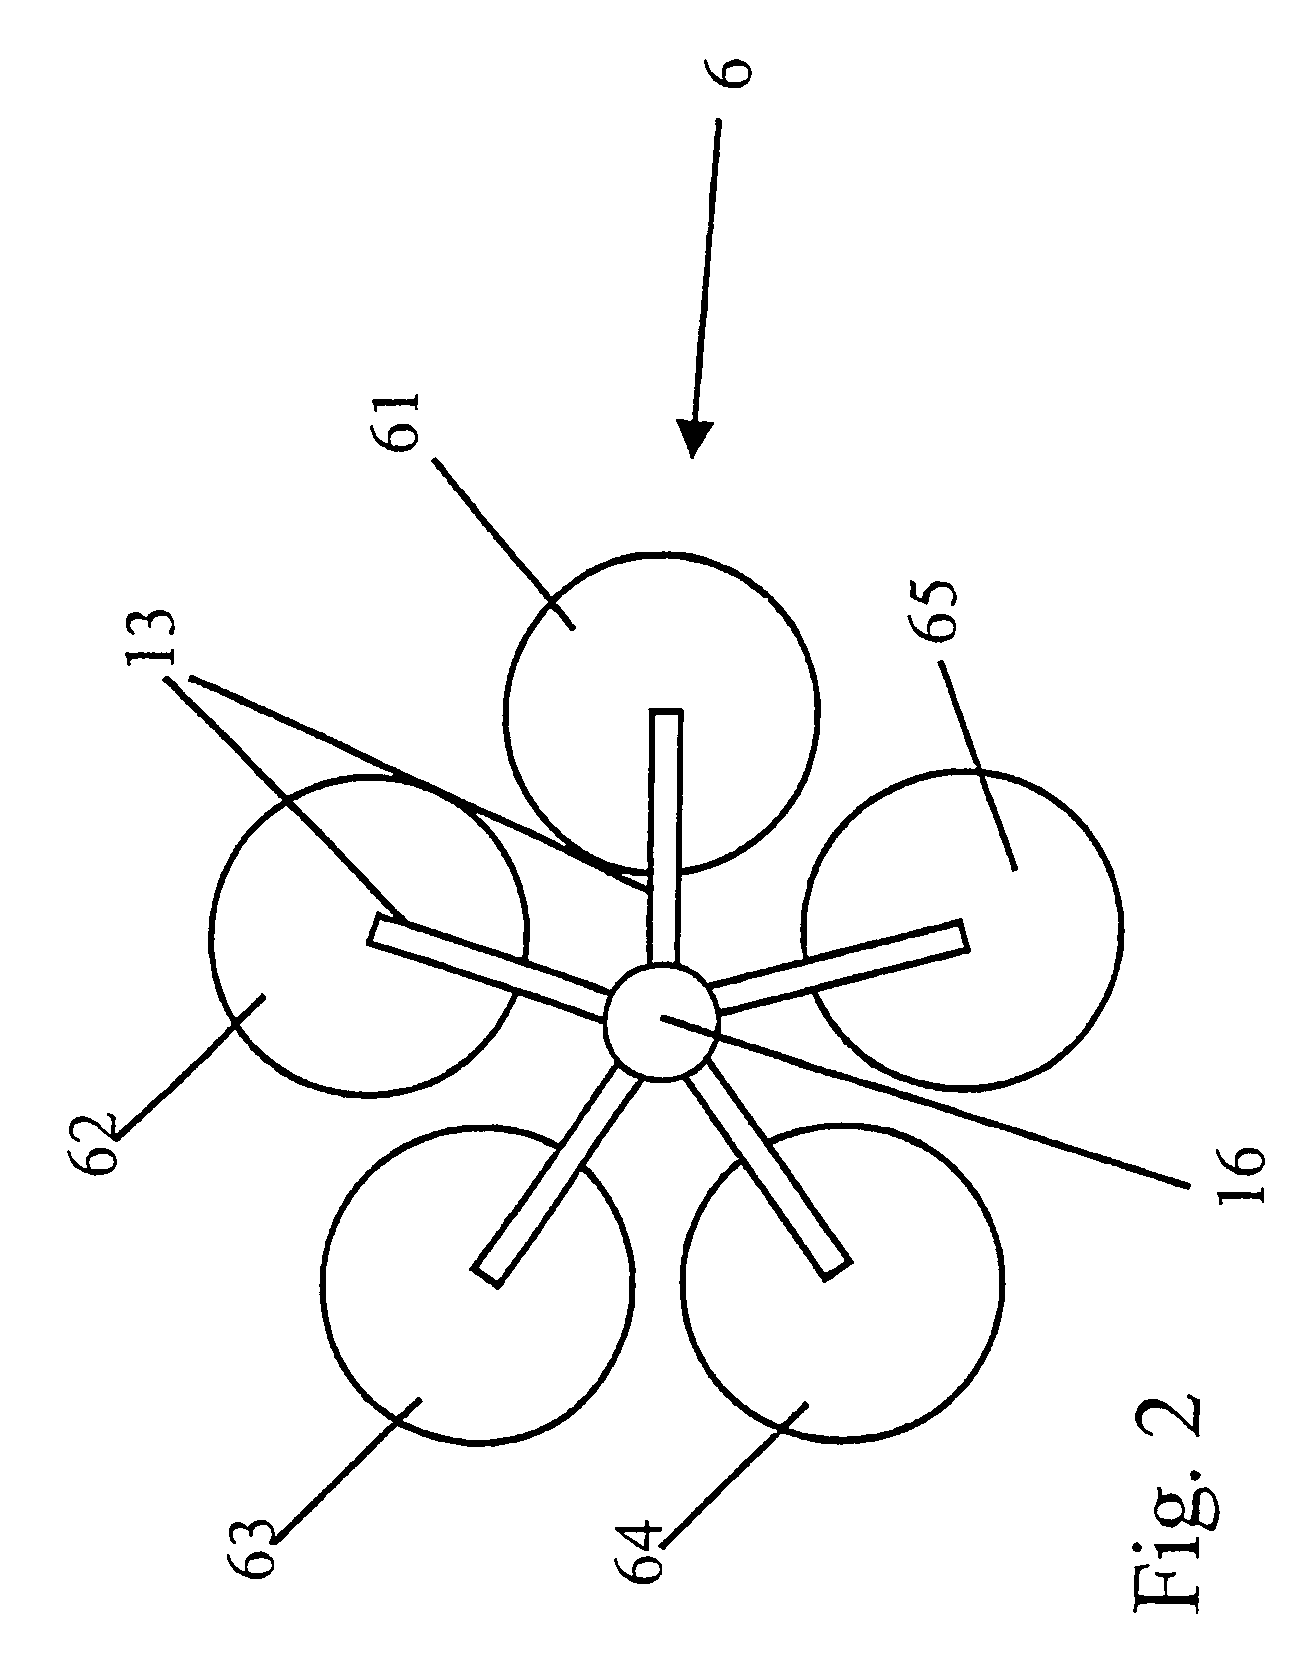 Method and device for the decontamination of plastic flakes